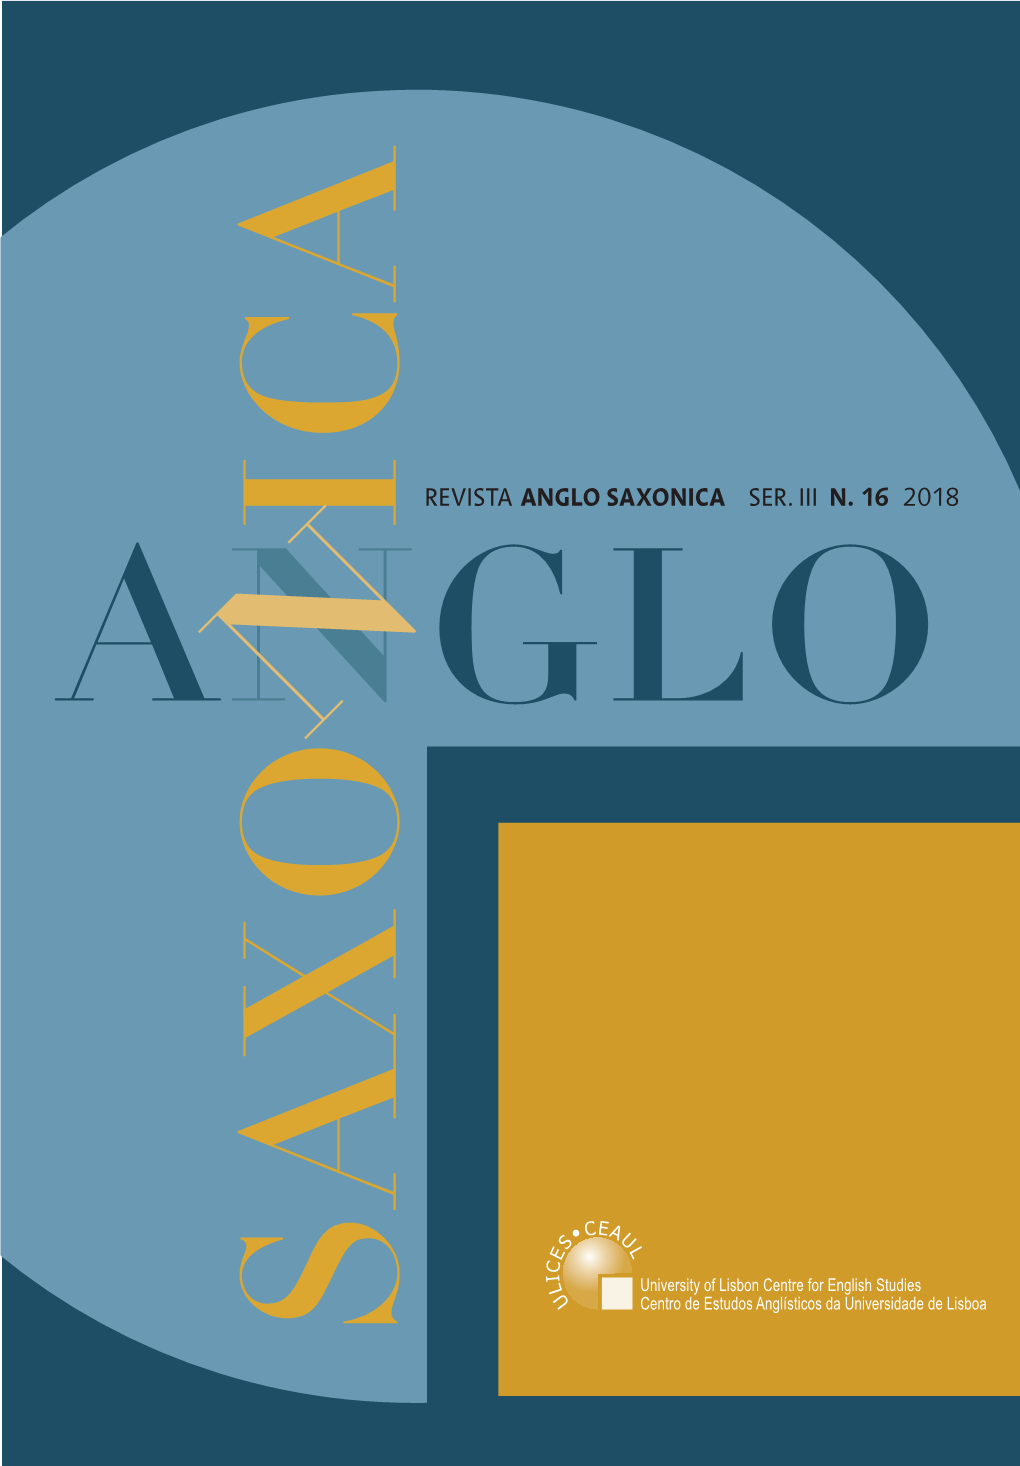 Revista Anglo Saxonica Ser. Iii N. 16 2018 a Nnglo Saxo Ica Anglo Saxonica Ser